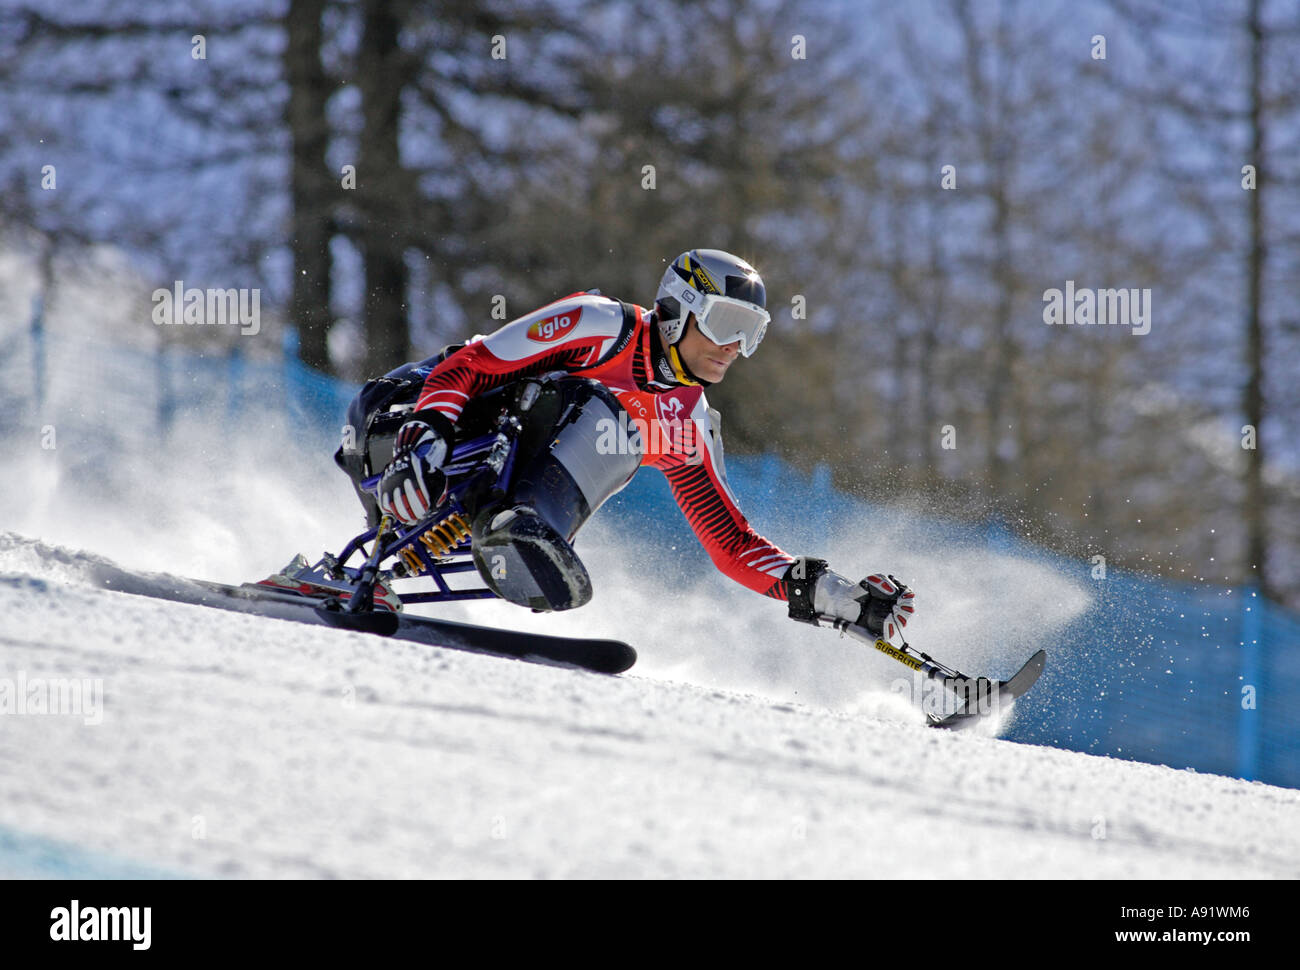 Juergen Egle LW11 of Austria in the Mens Alpine Skiing Super G Sitting competition Stock Photo